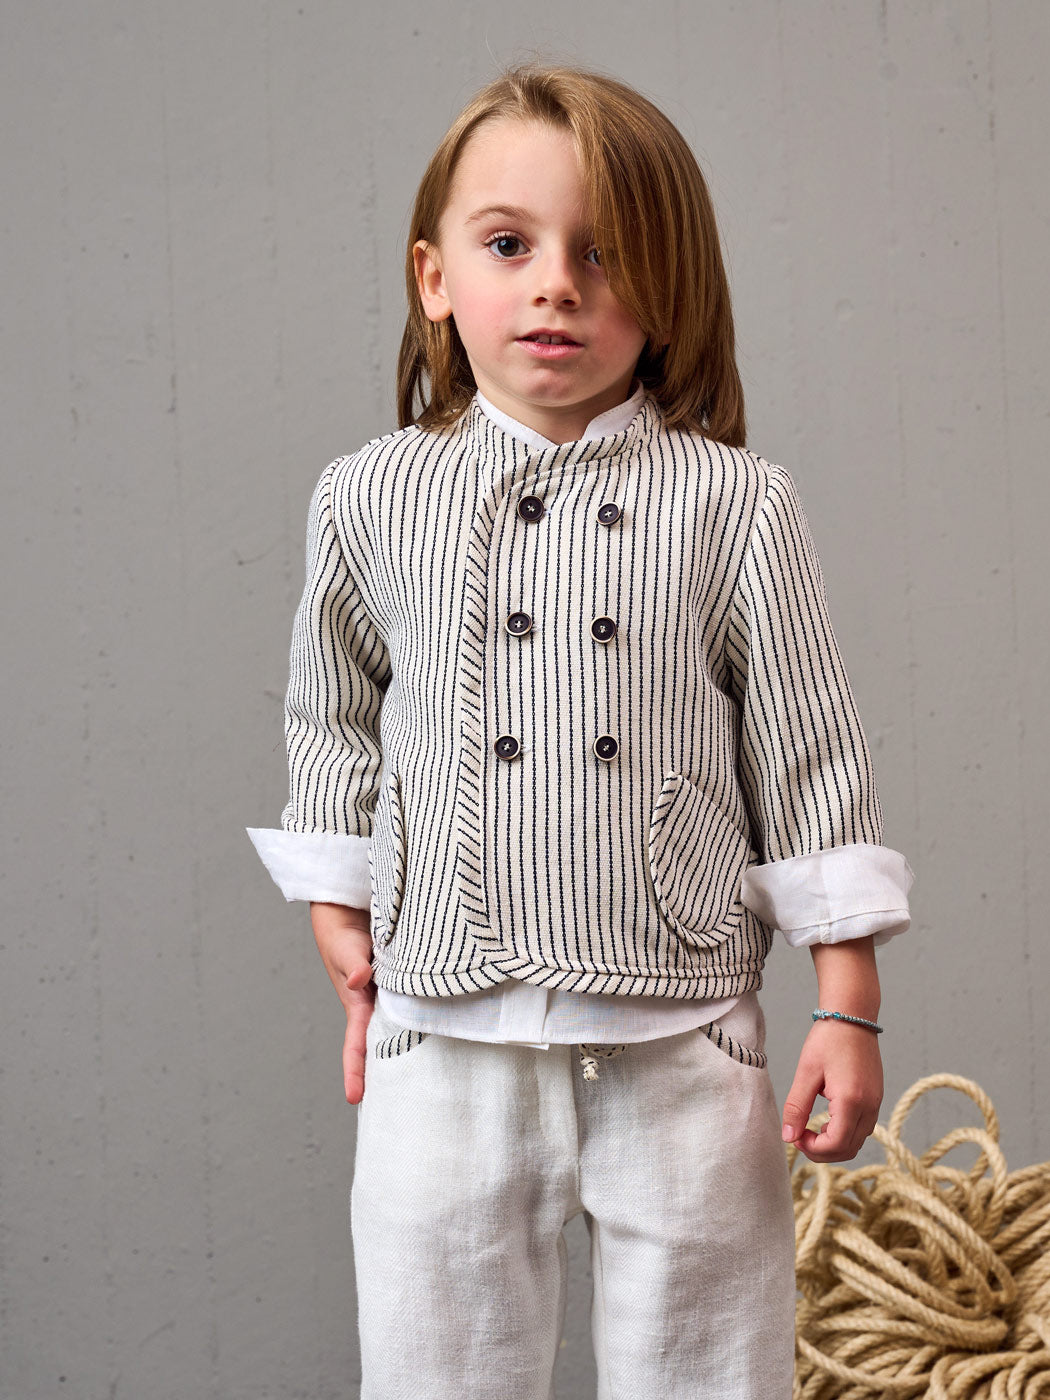 Baptism Linen outfit 5pcs with striped Jacket - KERT